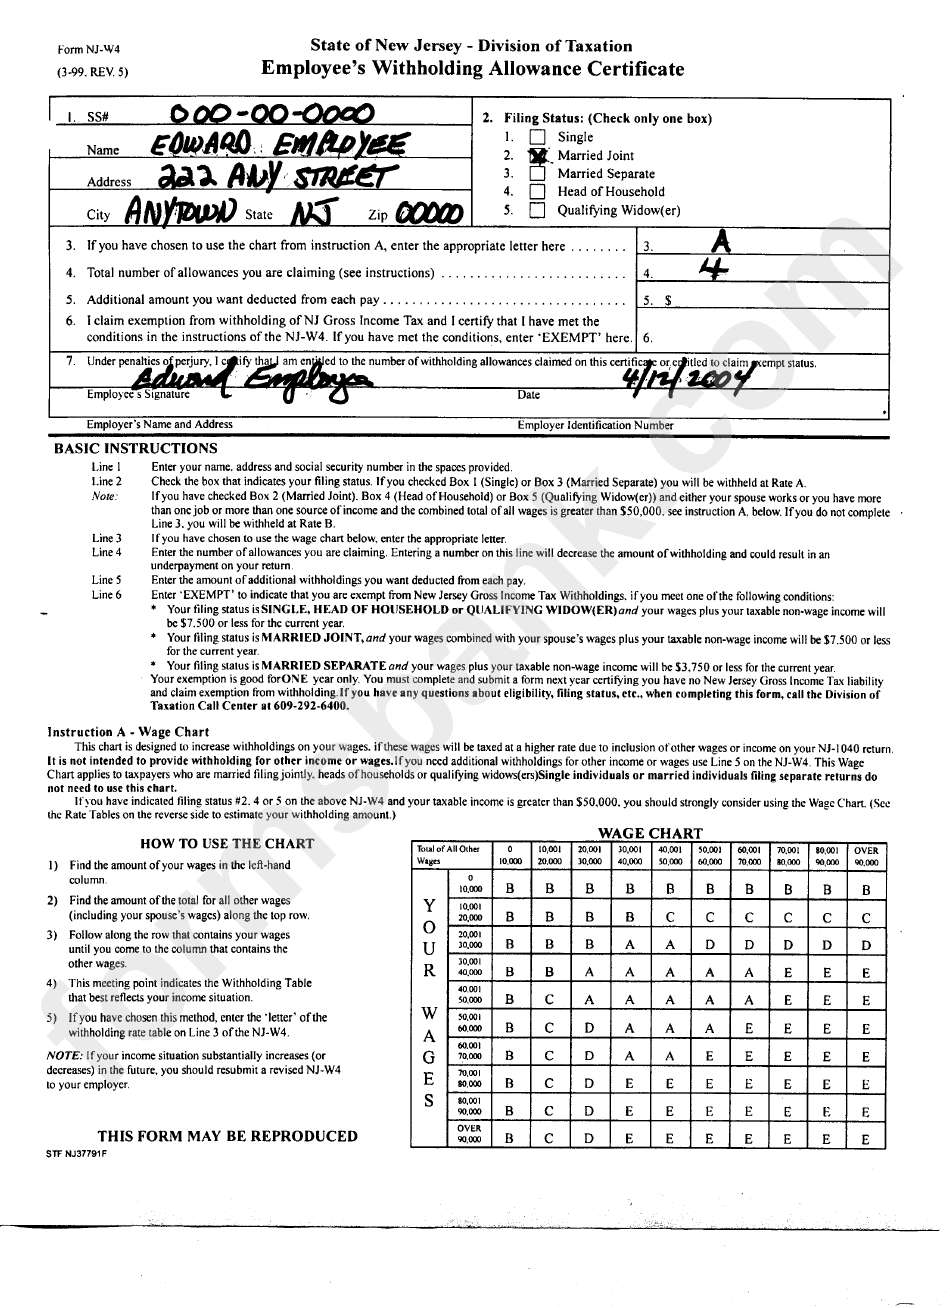 Form NjW4 Example Employee'S Withholding Allowance Certificate New